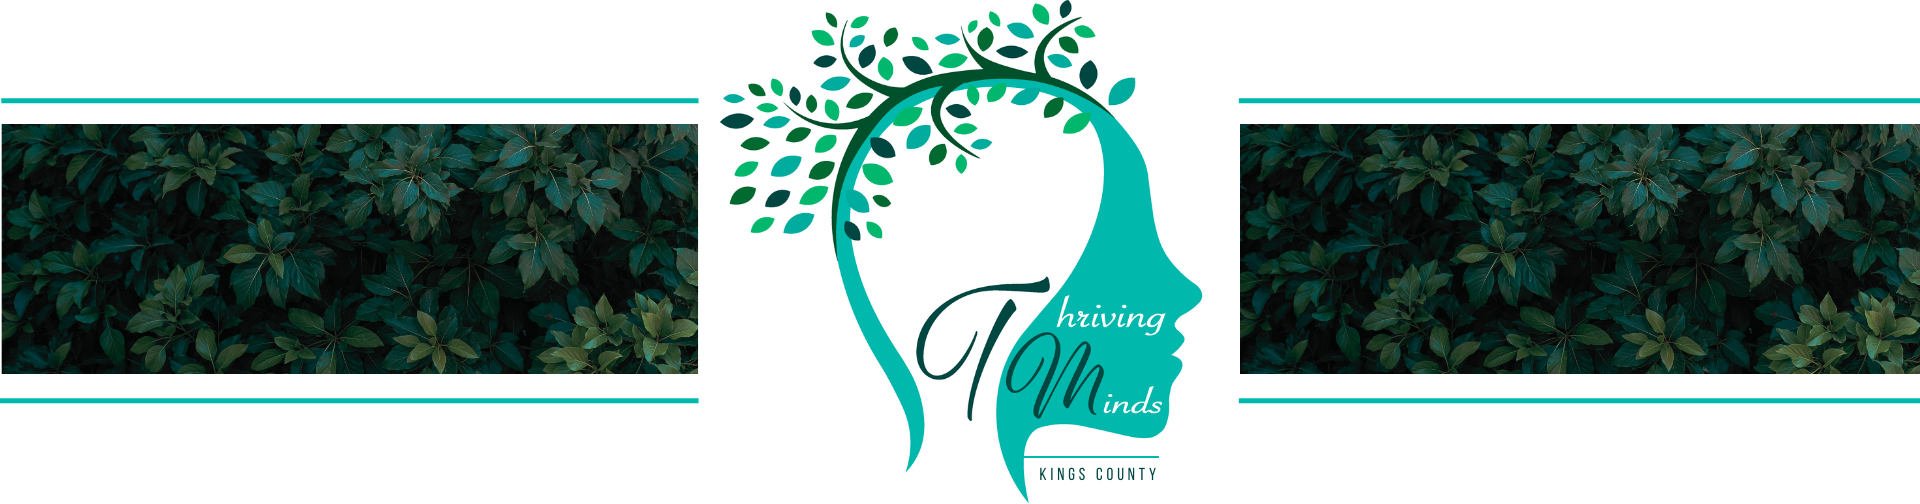 Thriving Minds Kings County